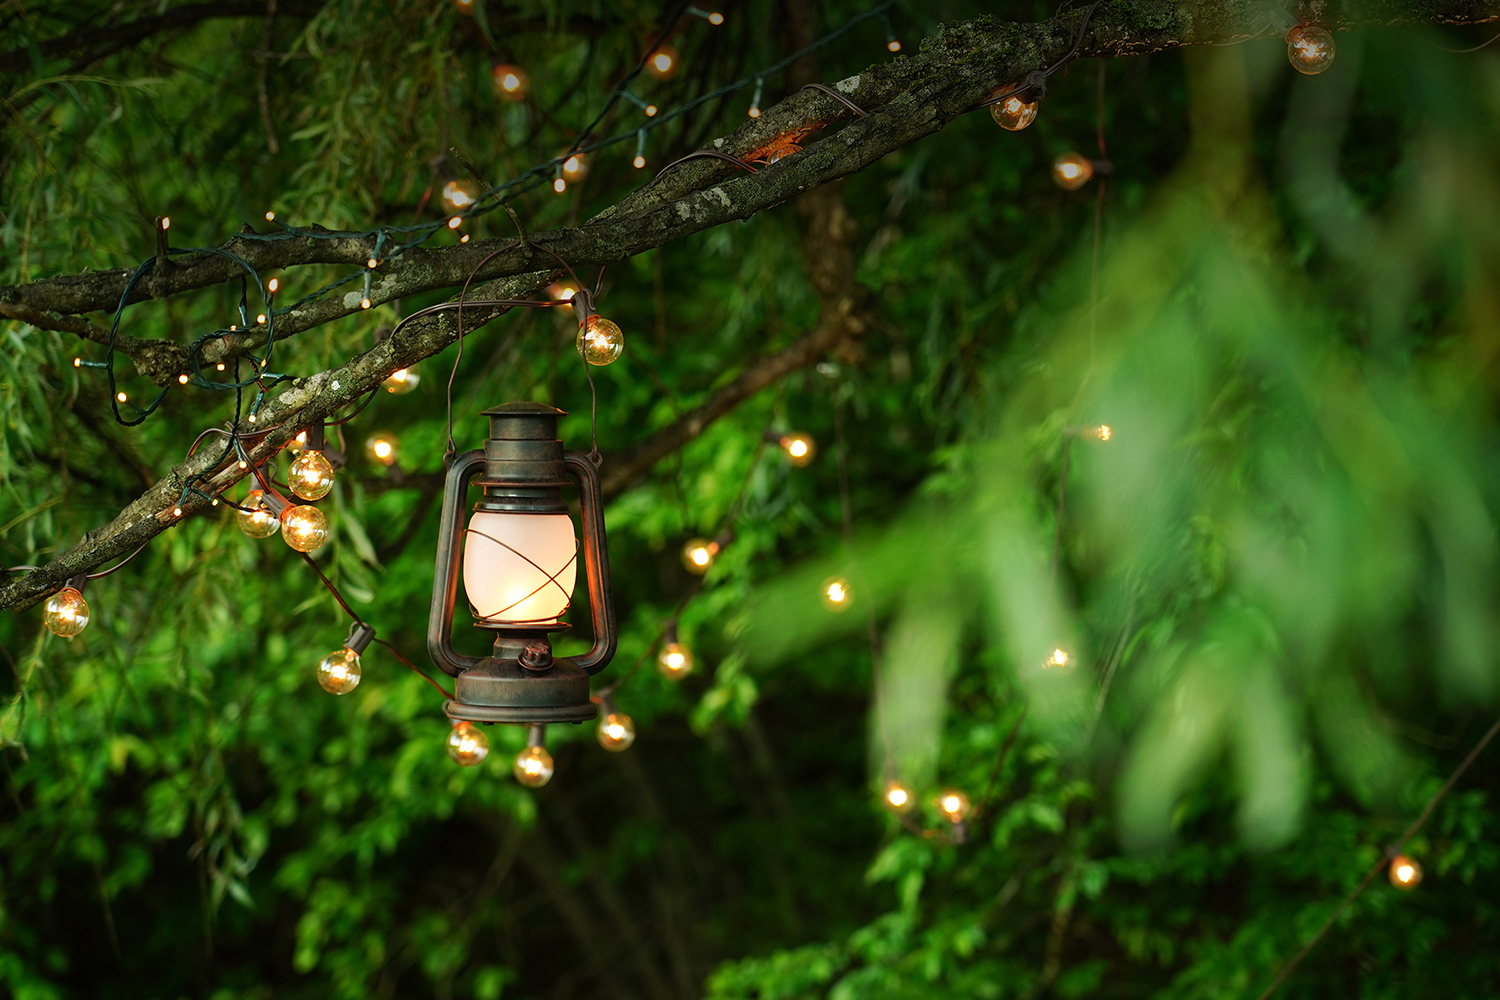 Lights and a lantern hanging in a willow tree ceremony location